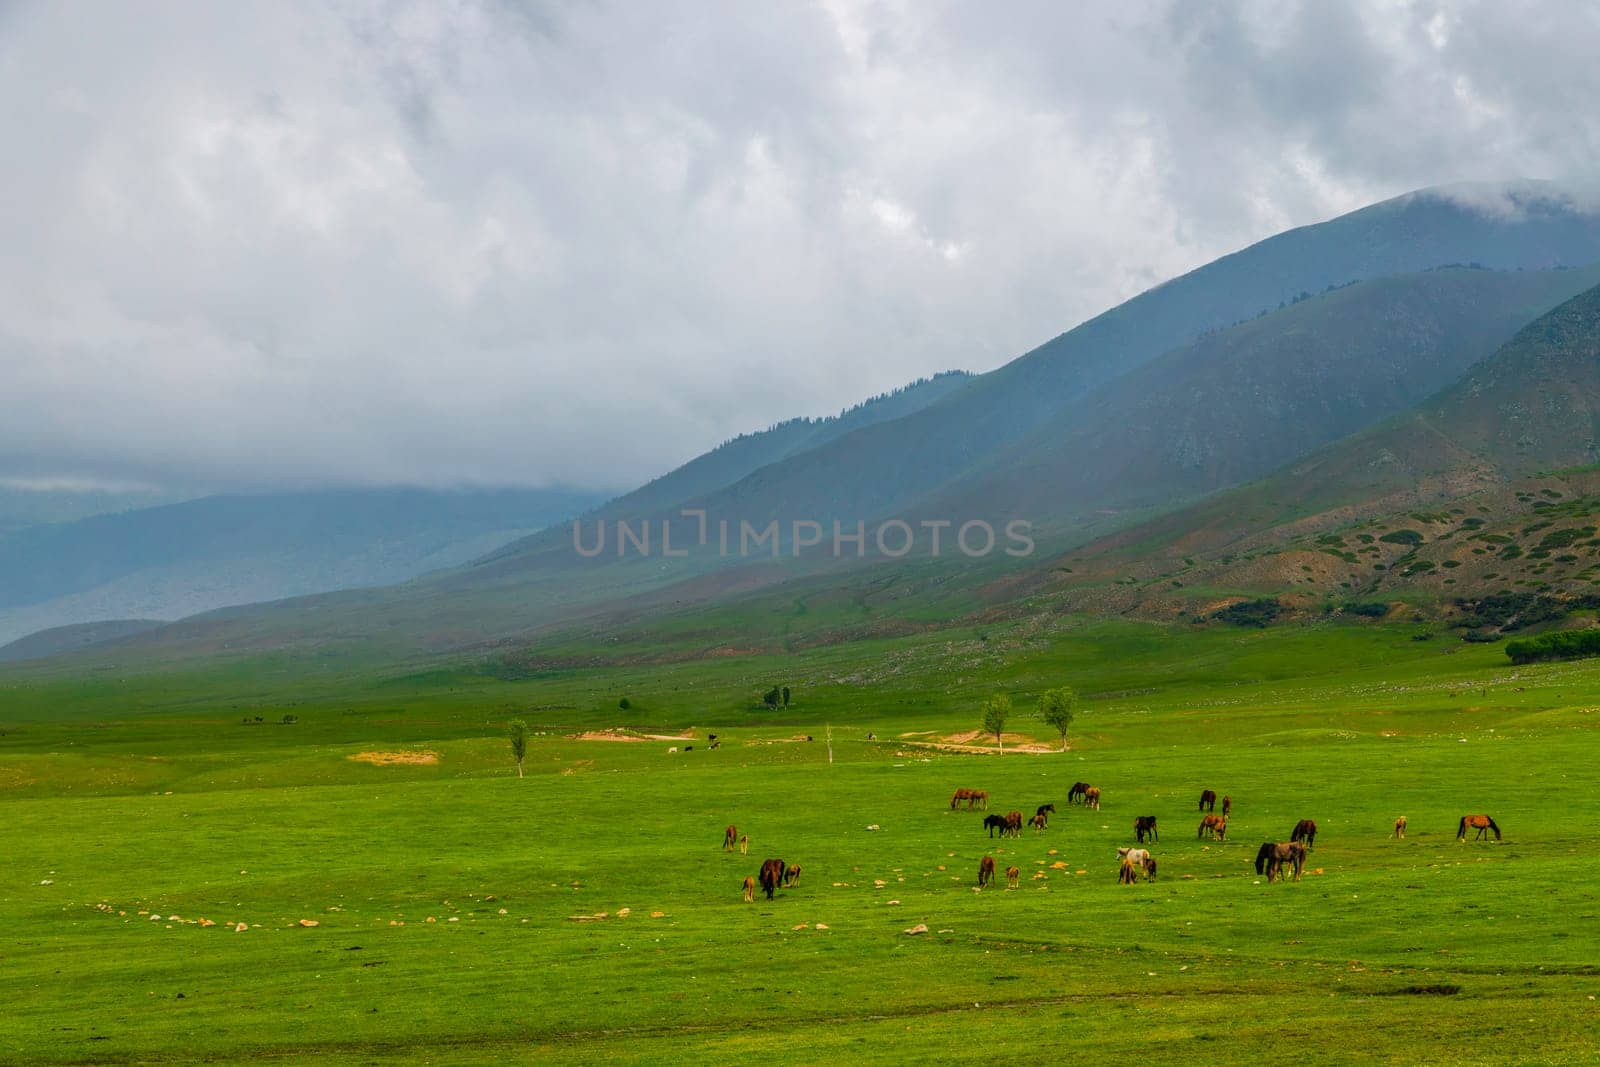 Herd of horses grazing in grassy field with mountains in the background by z1b